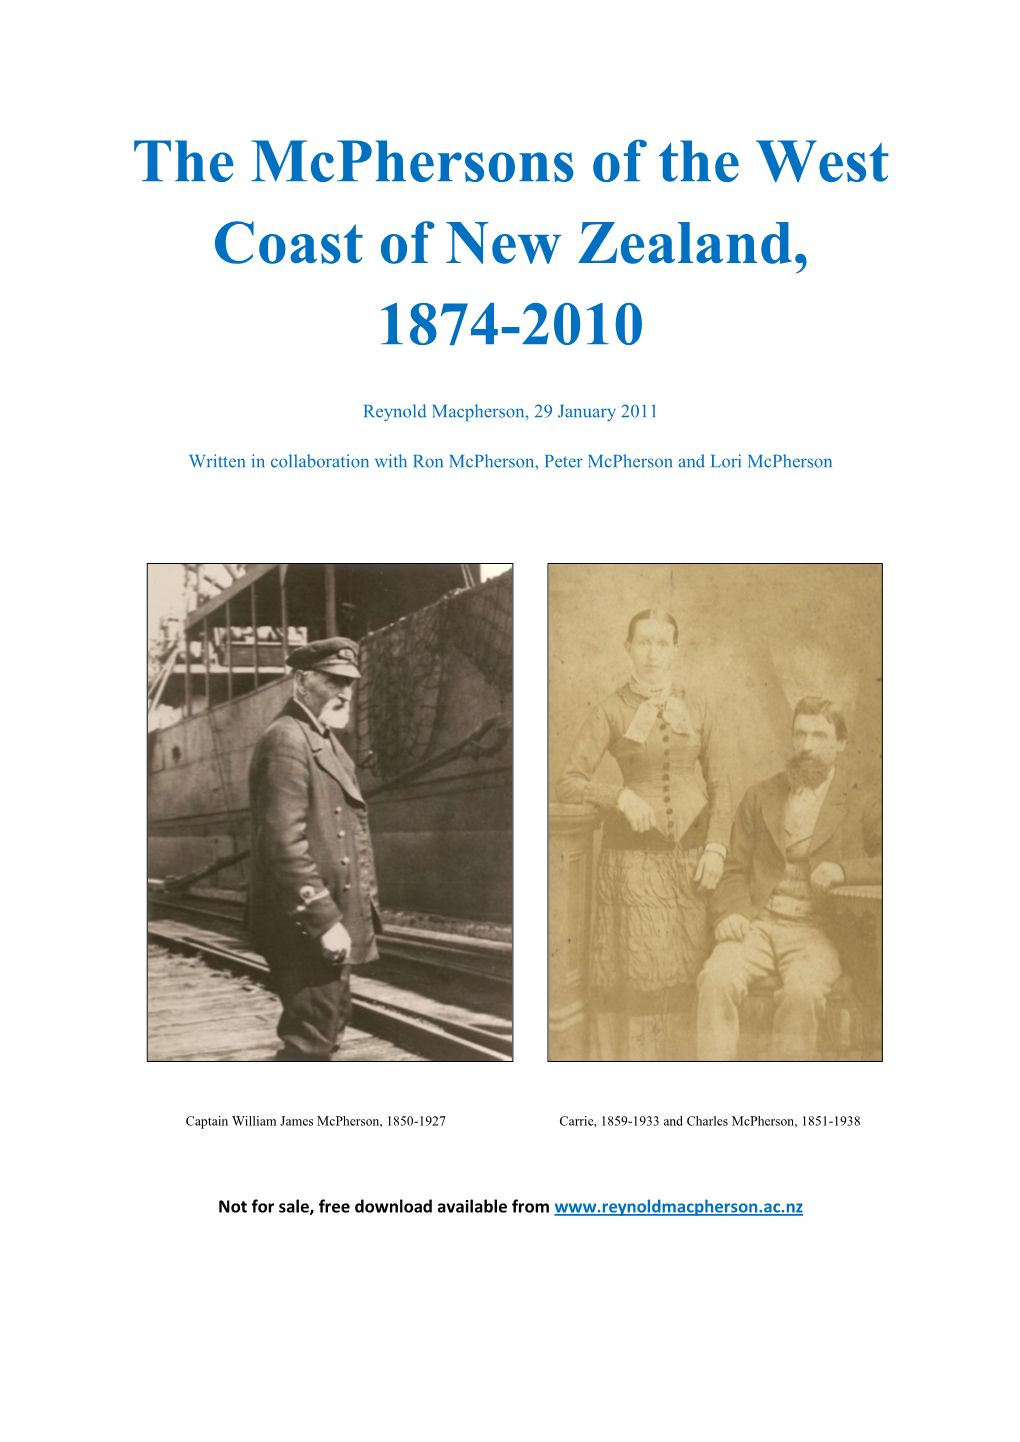 The Mcphersons of the West Coast of New Zealand, 1874-2010